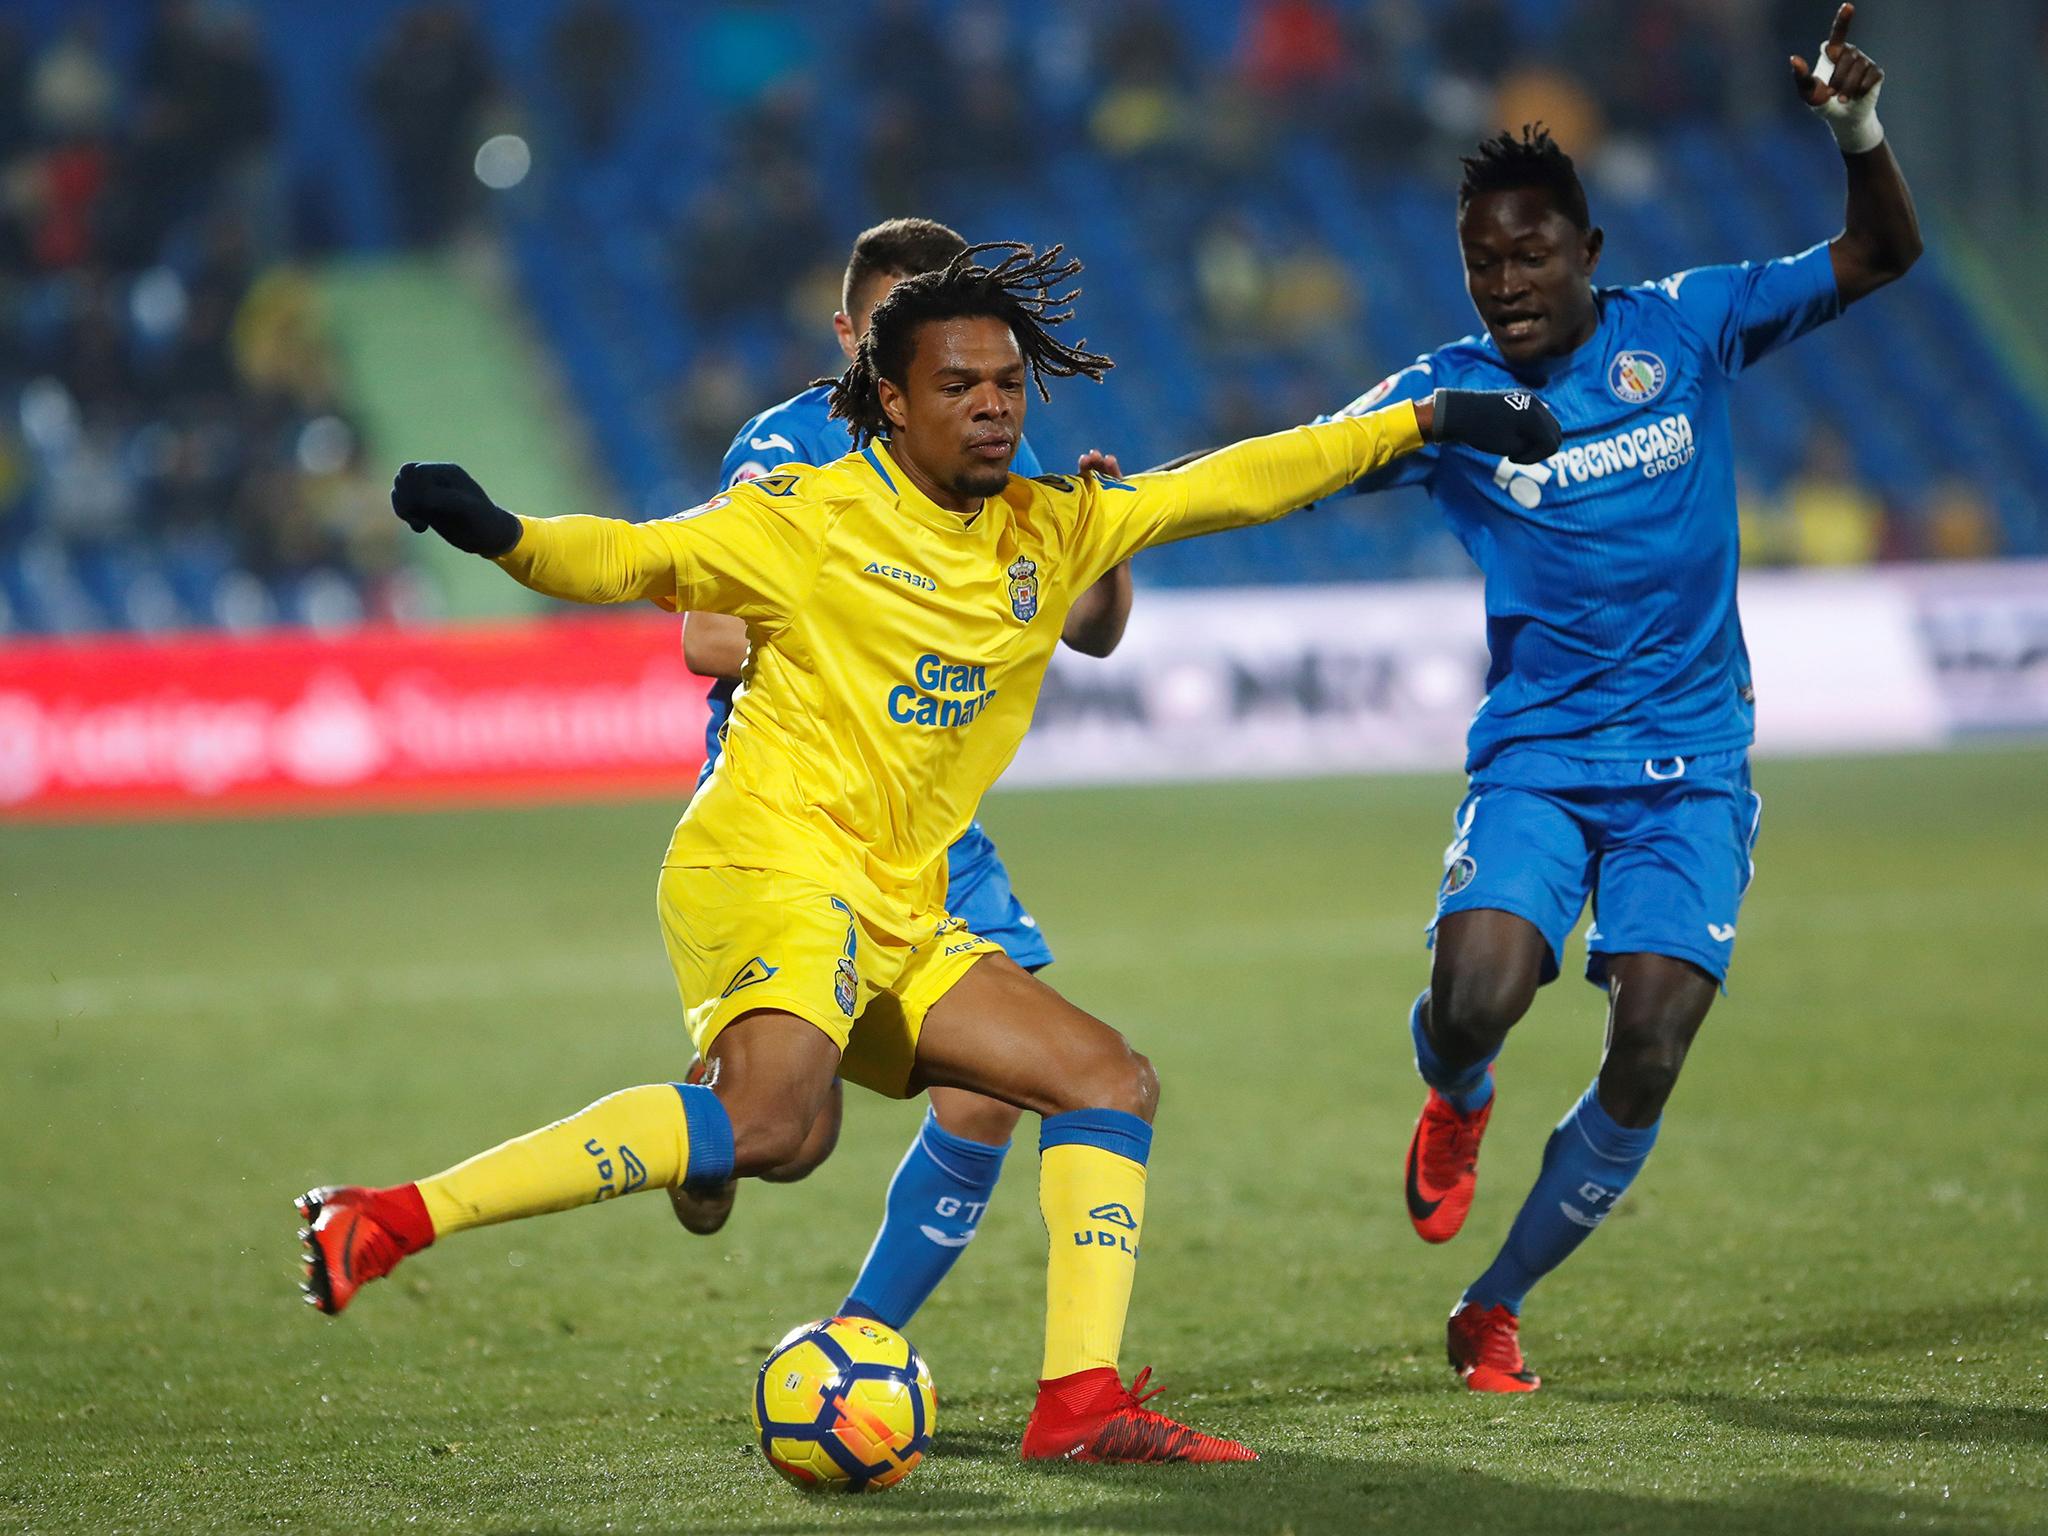 Loic Remy is no longer wanted at Las Palmas after falling out with manager Paco Jemez